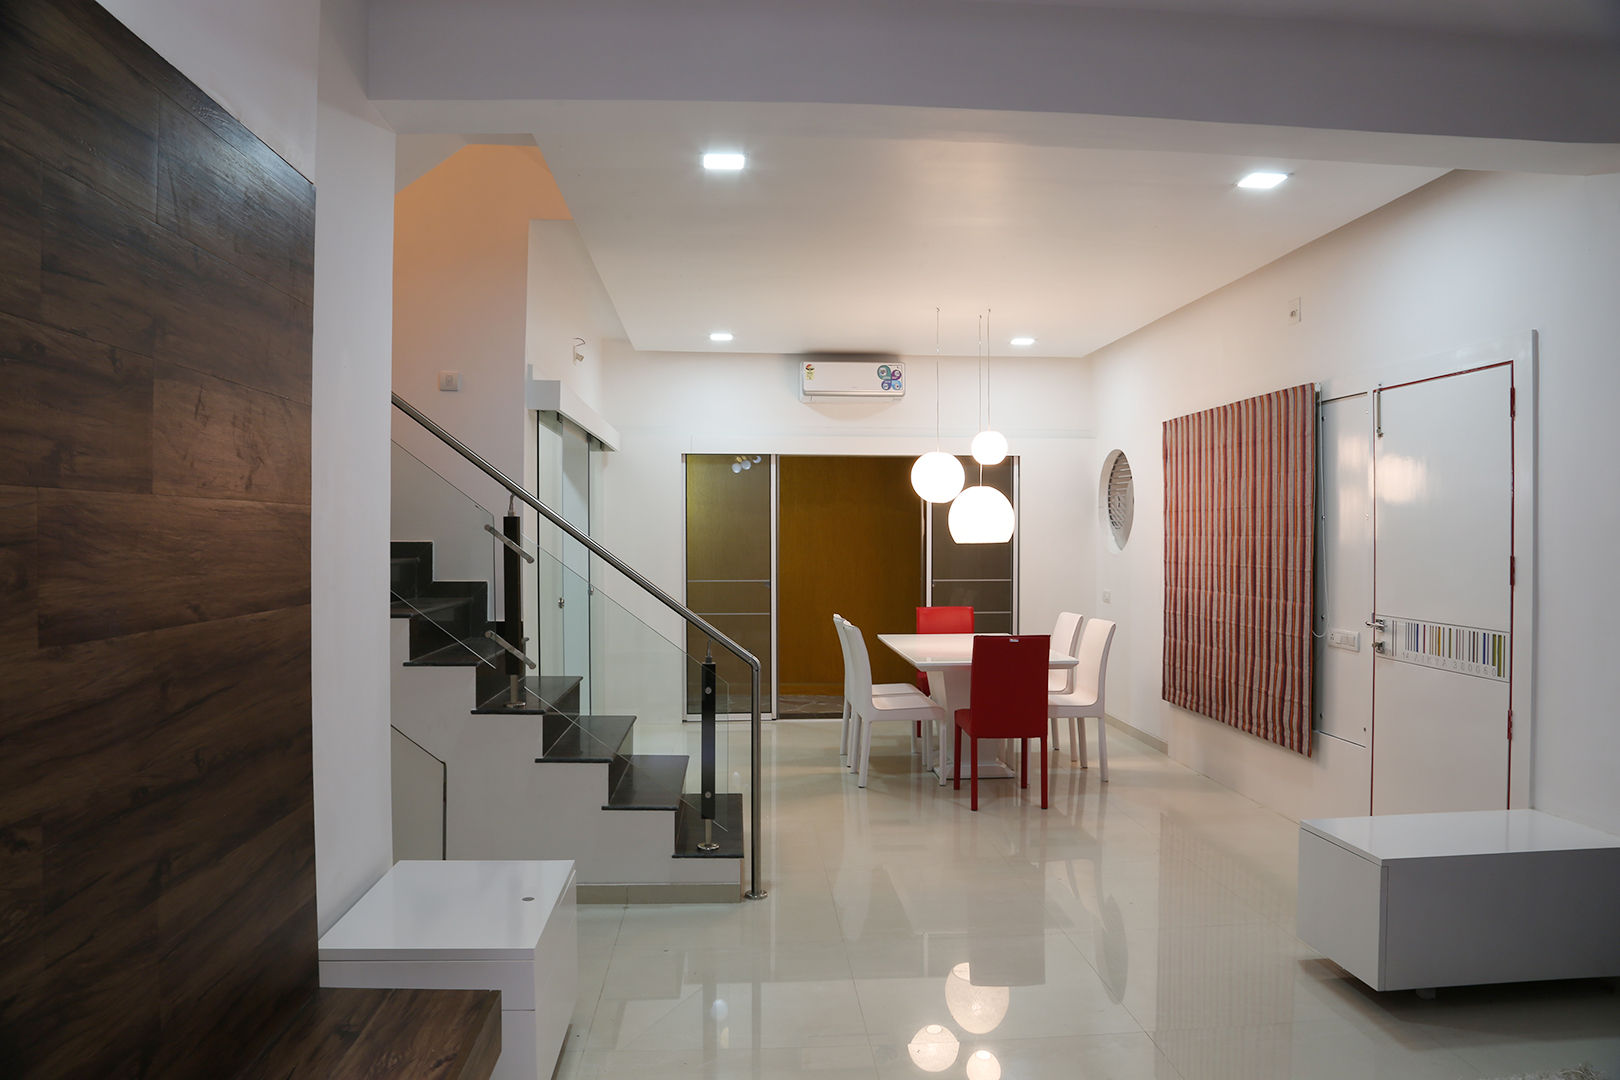 Single Family Private Residence, Ahmedabad, A New Dimension A New Dimension غرفة السفرة